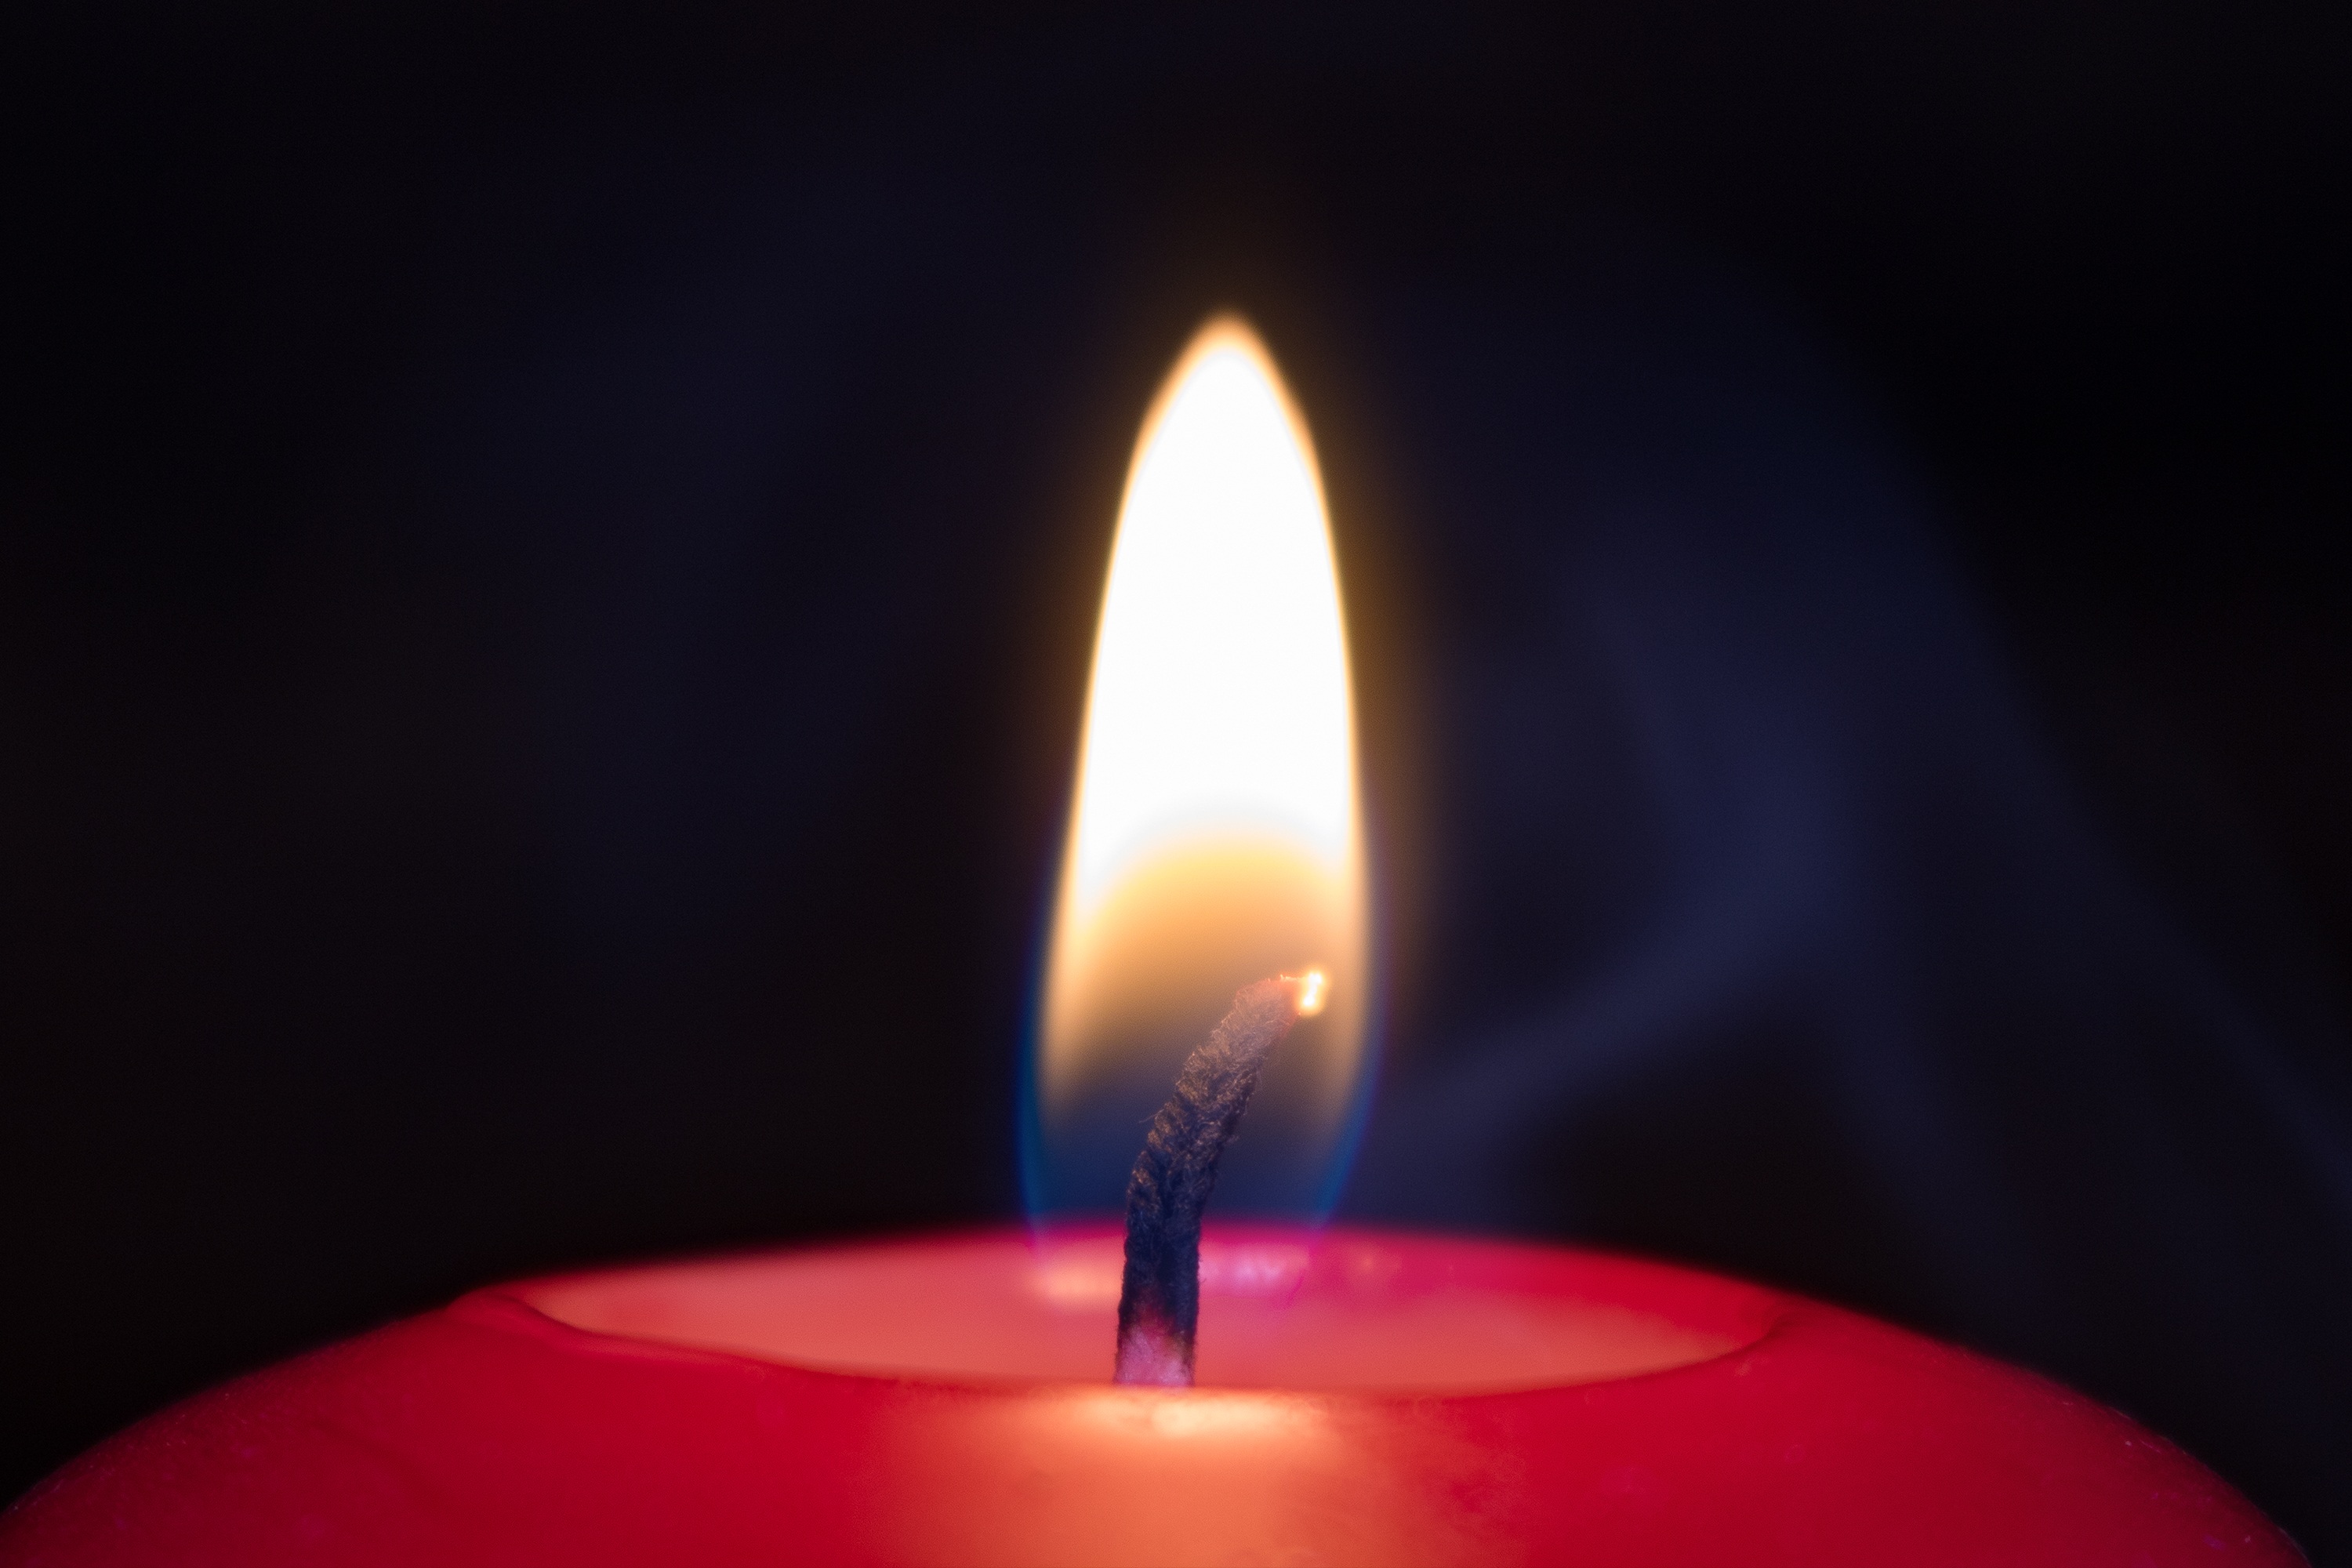 android flame, miscellanea, miscellaneous, candle, wick, wax